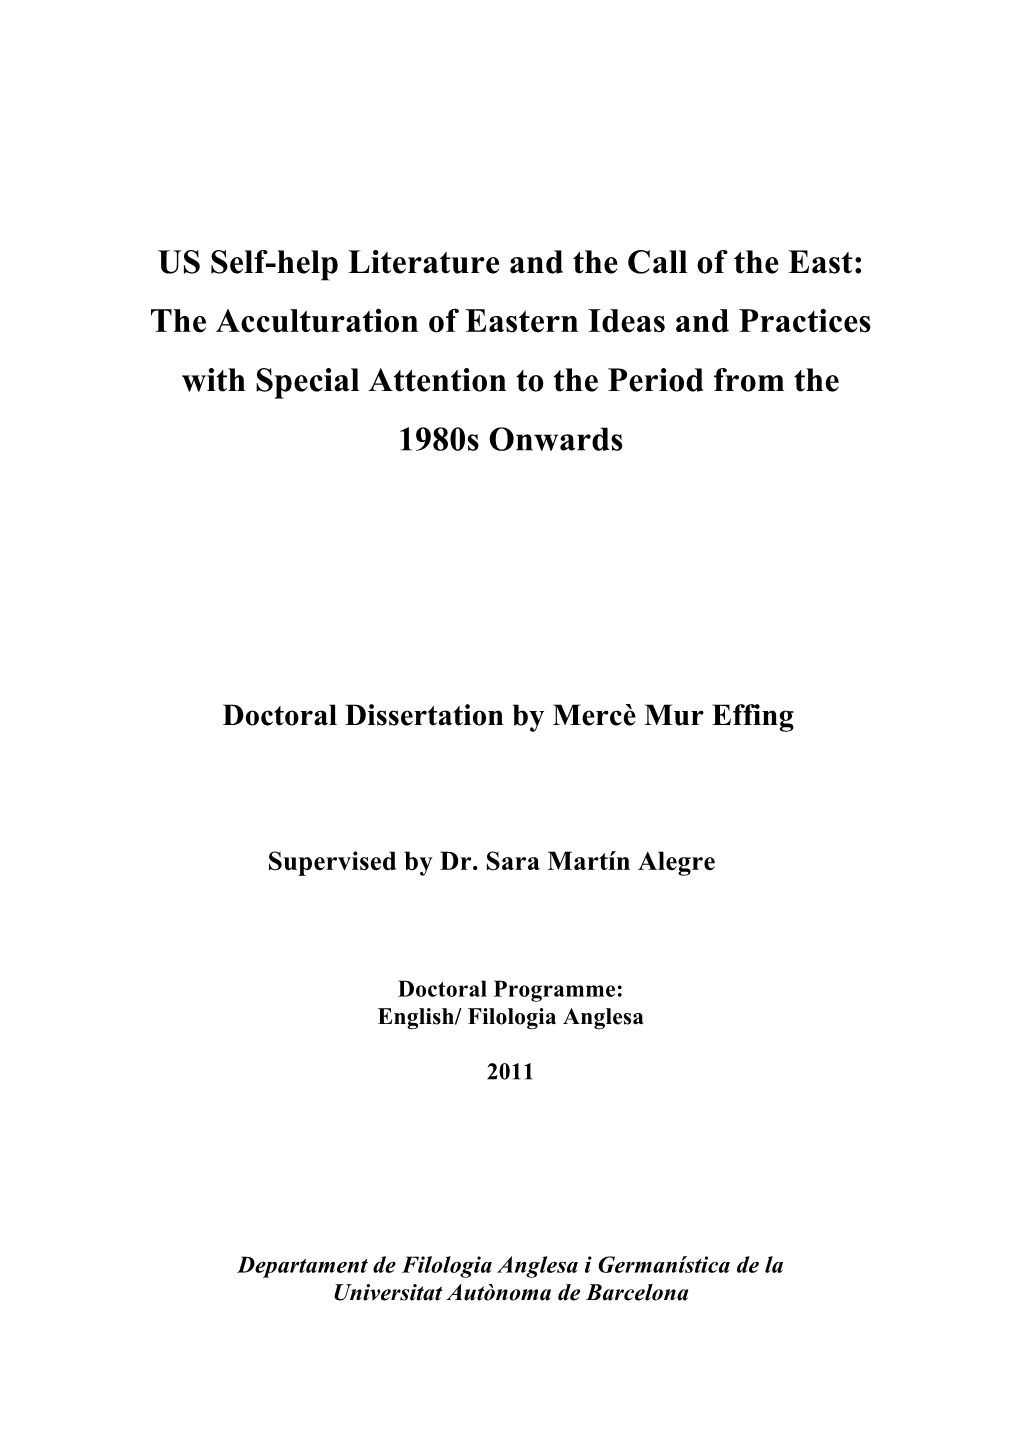 US Self-Help Literature and the Call of the East: the Acculturation of Eastern Ideas and Practices with Special Attention to the Period from the 1980S Onwards